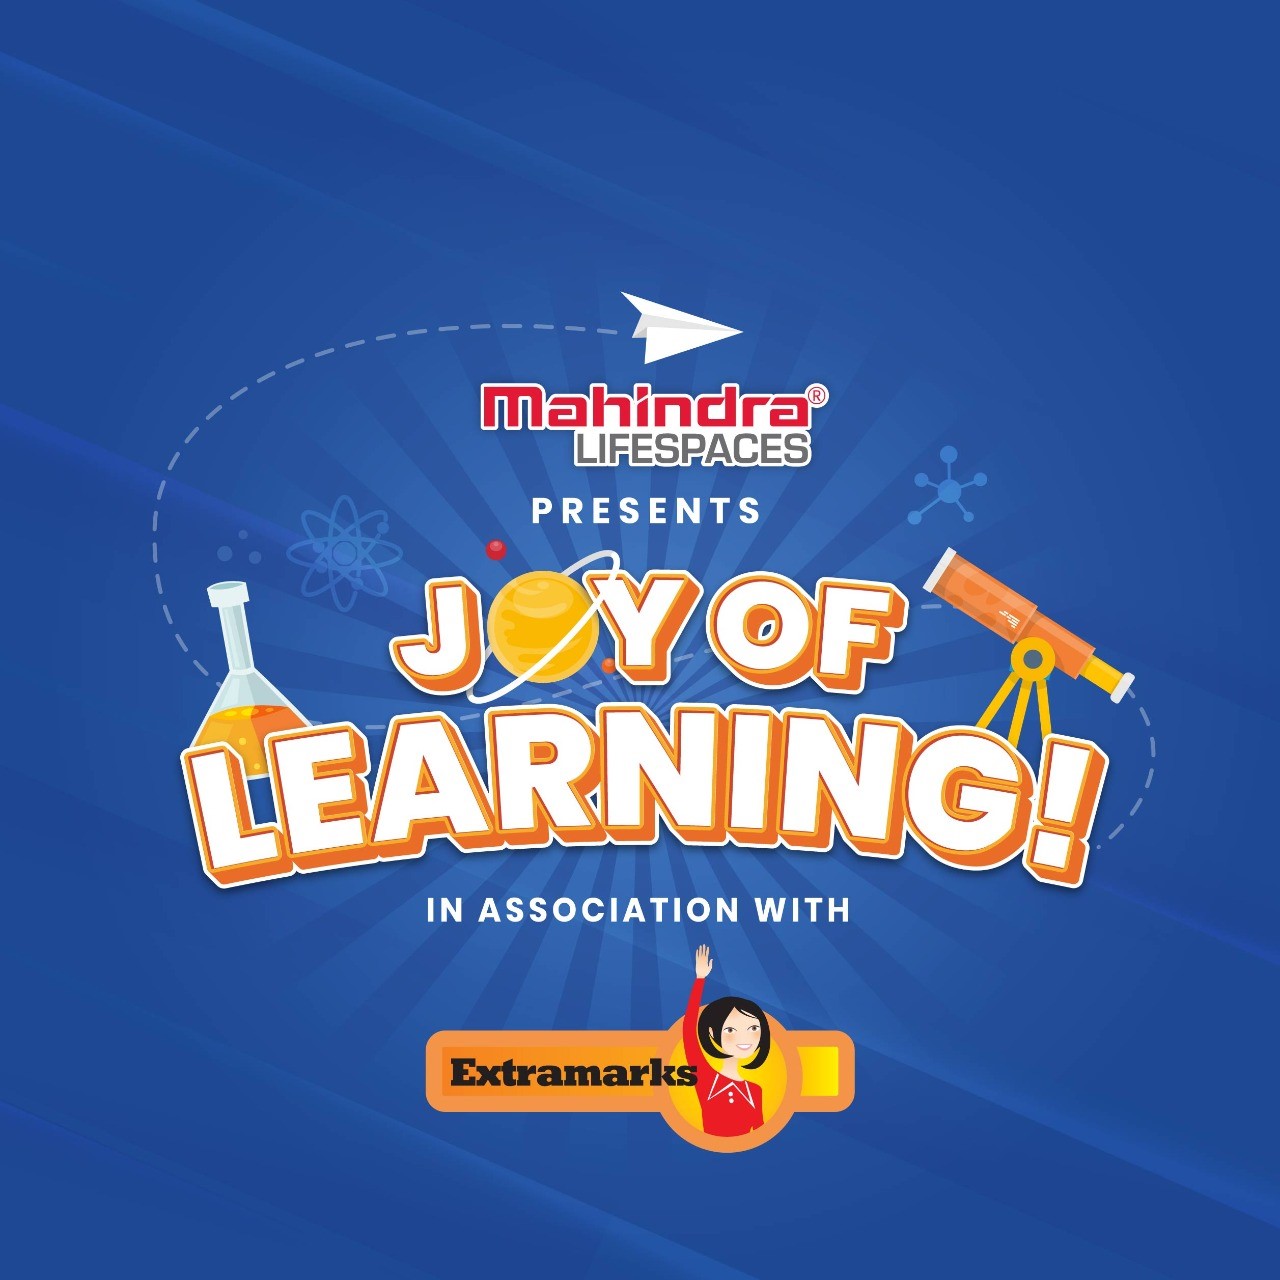 Mahindra Lifespaces partners with Extramarks Education to spread the ‘Joy of Learning’